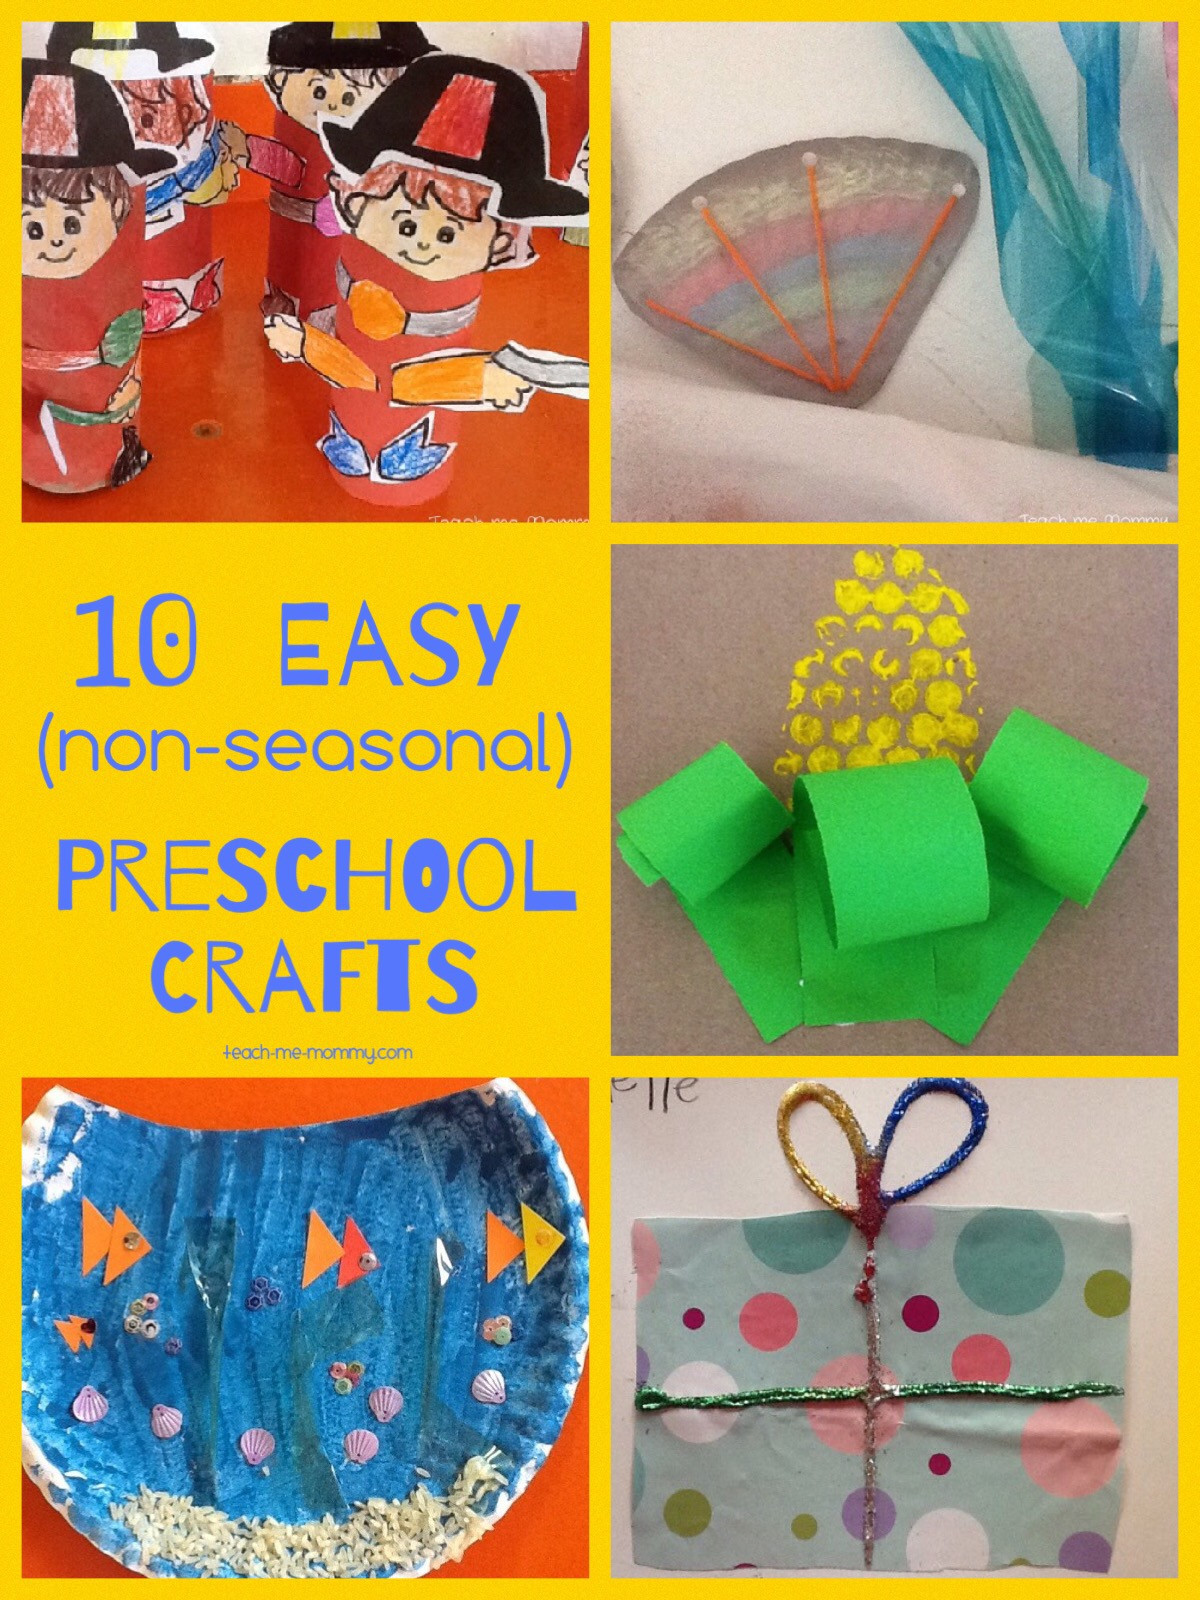 Simple Crafts For Preschoolers
 Easy Crafts for Preschoolers Teach Me Mommy